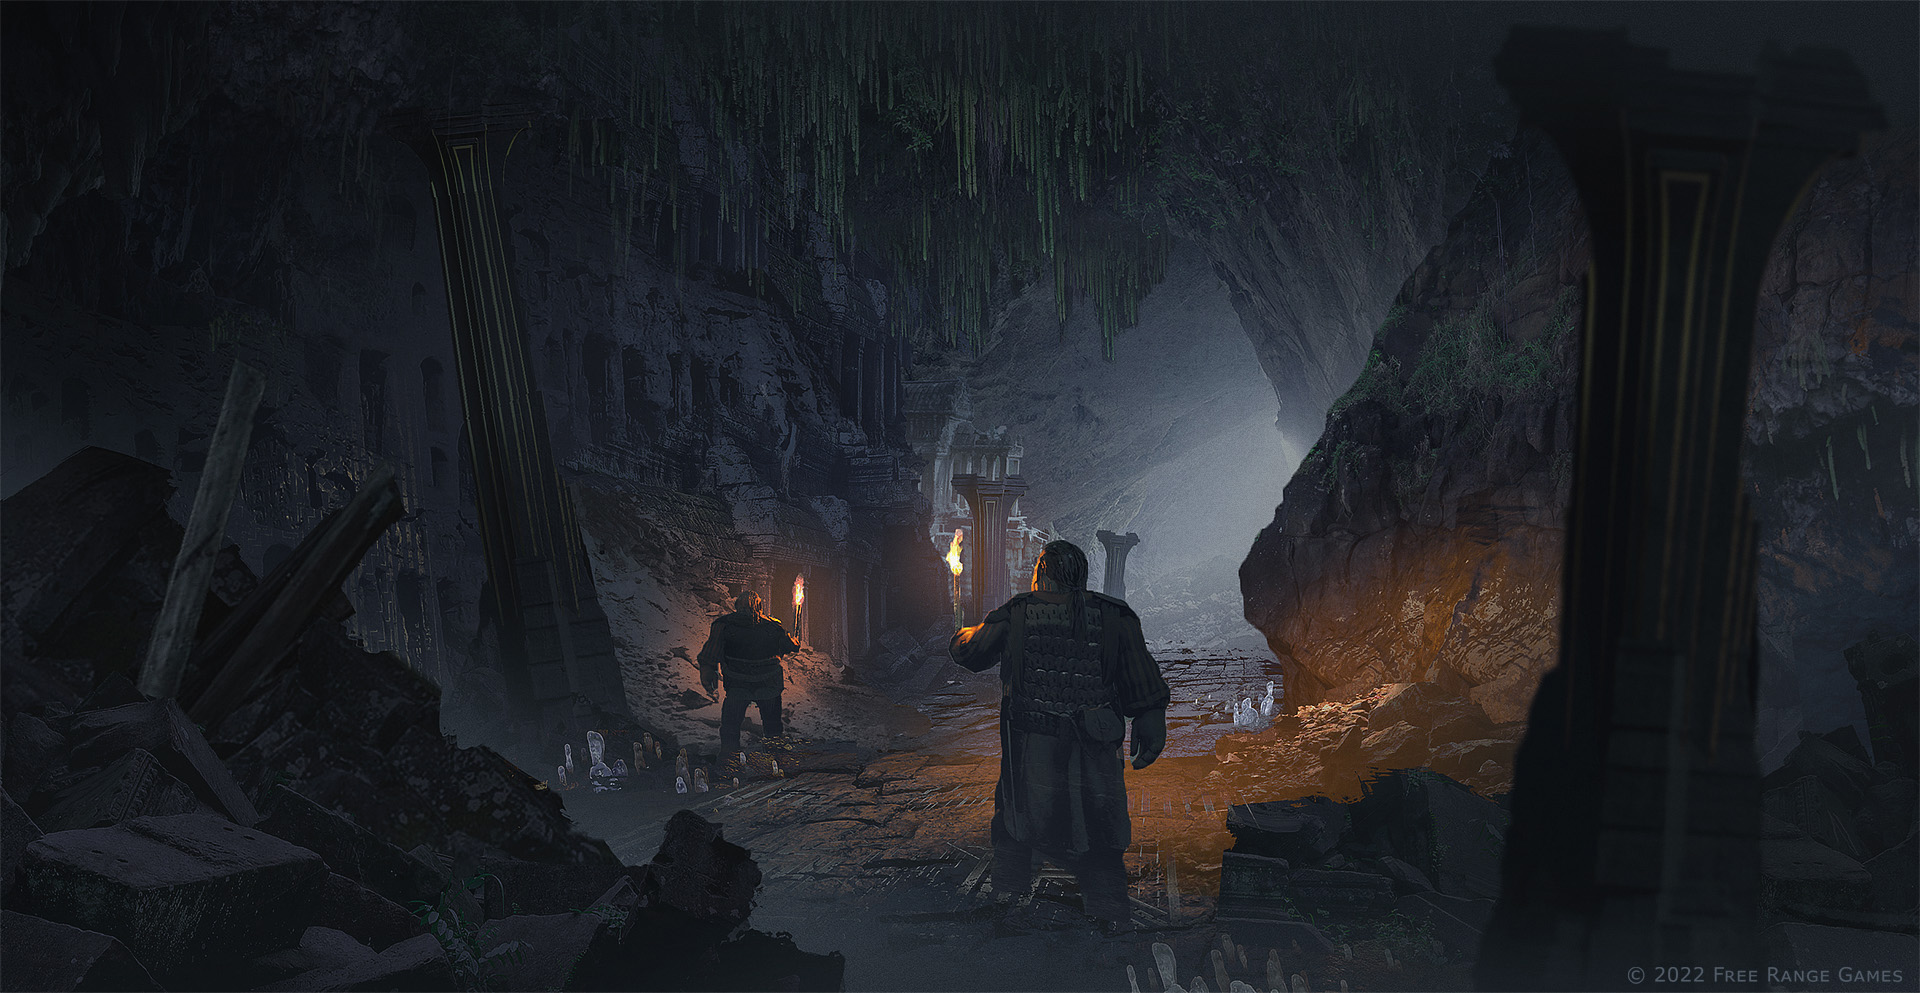 Concept art for Return to Moria showing caverns